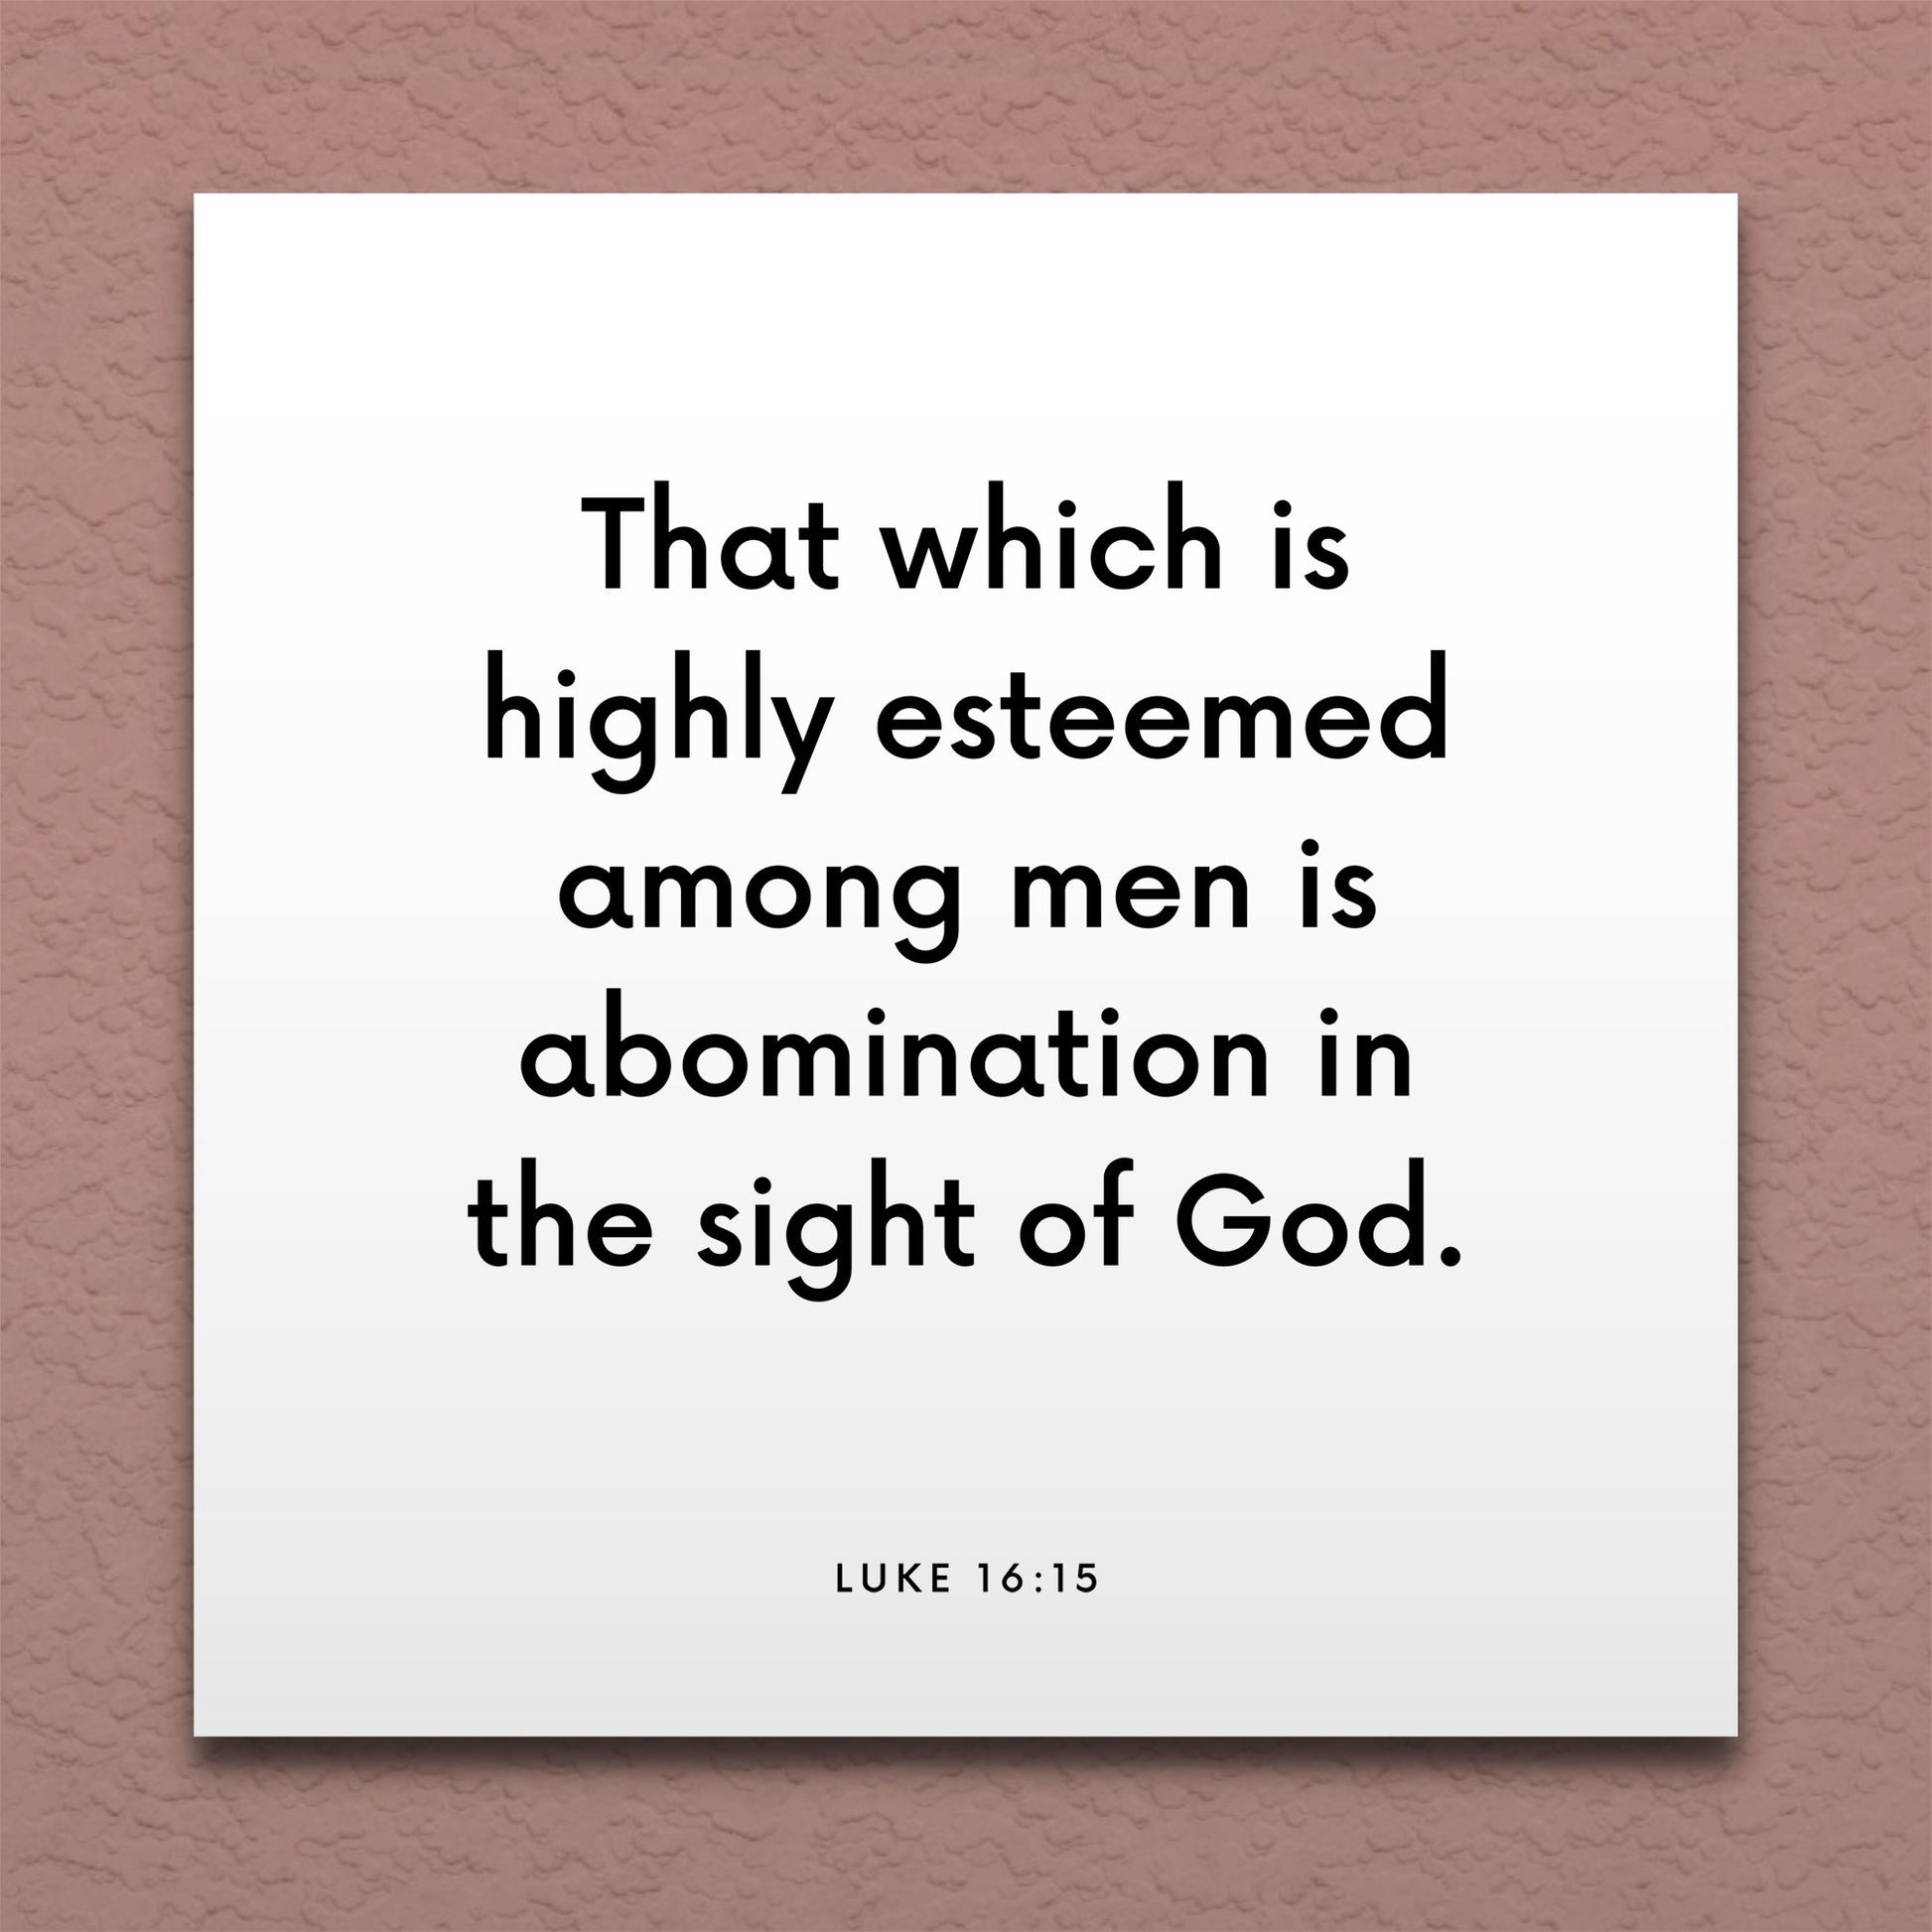 Wall-mounted scripture tile for Luke 16:15 - "That which is highly esteemed among men is abomination"